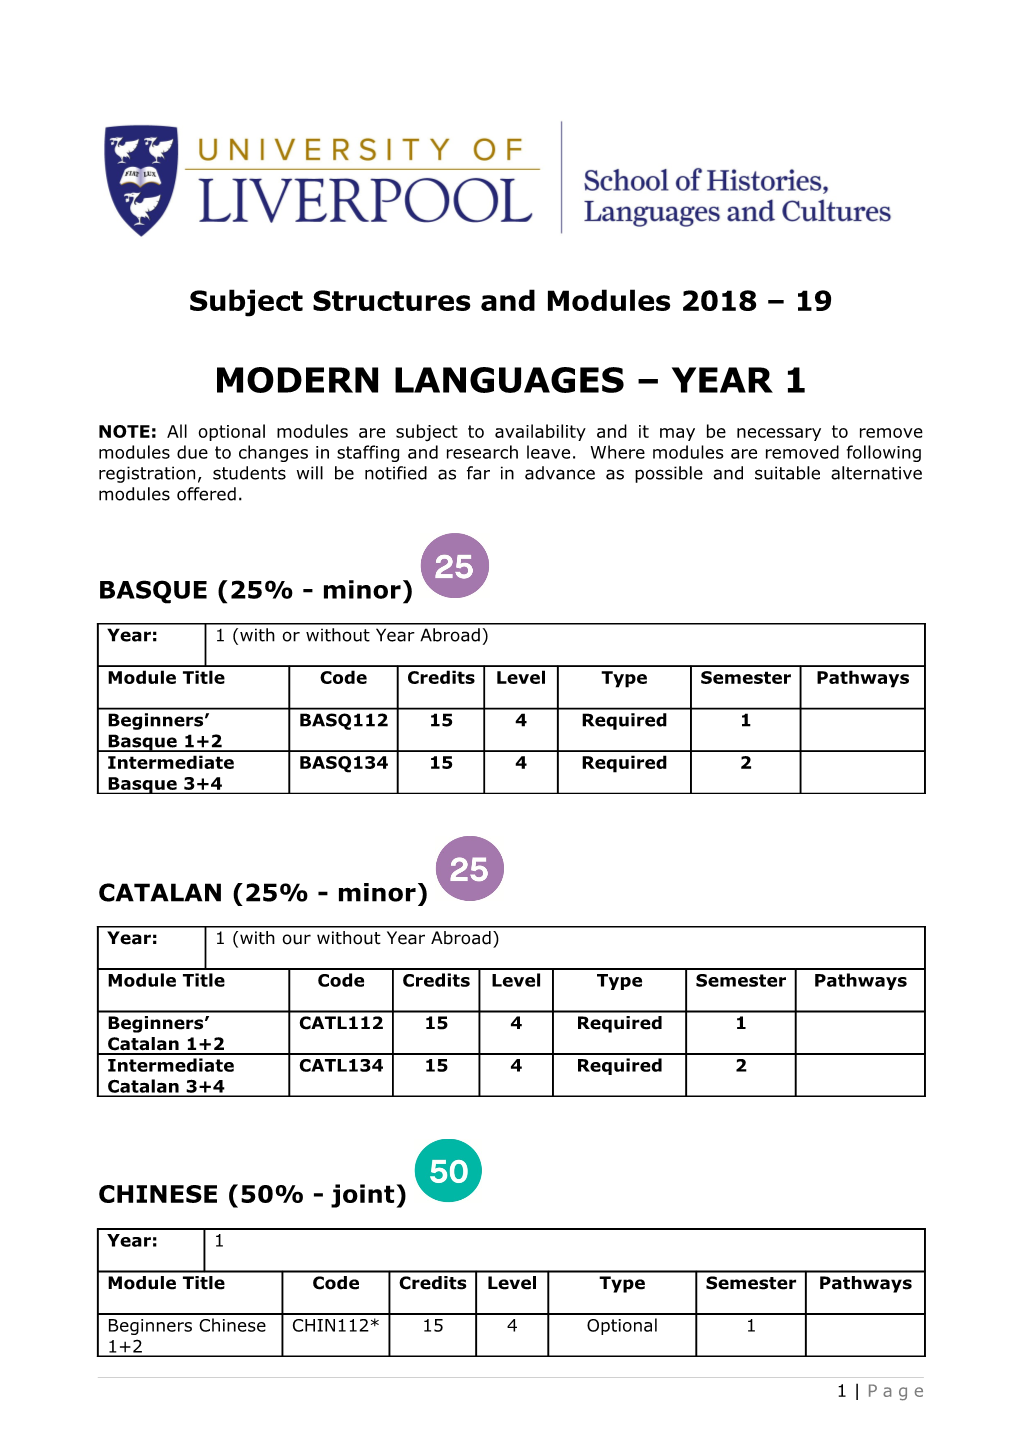 Subject Structuresand Modules 2018 19